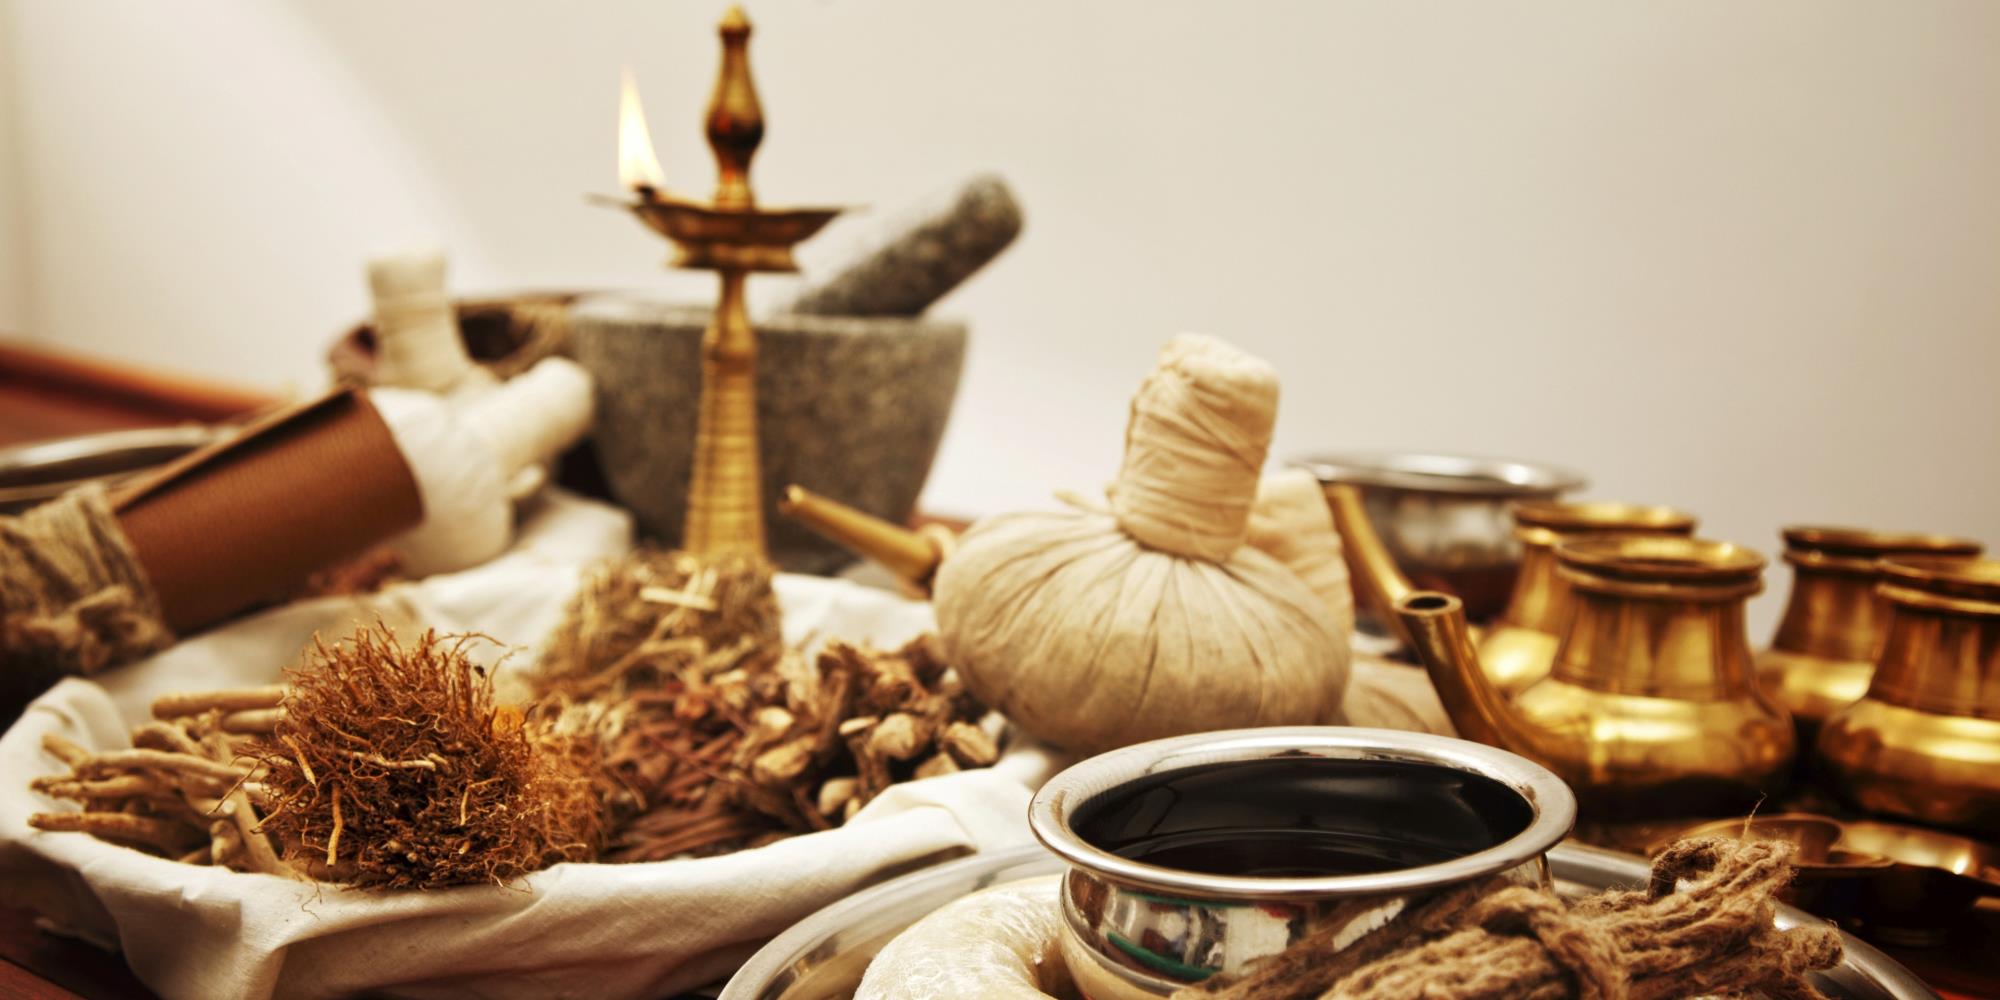 Our Ayurvedic Favorites to Keep You Company this Fall